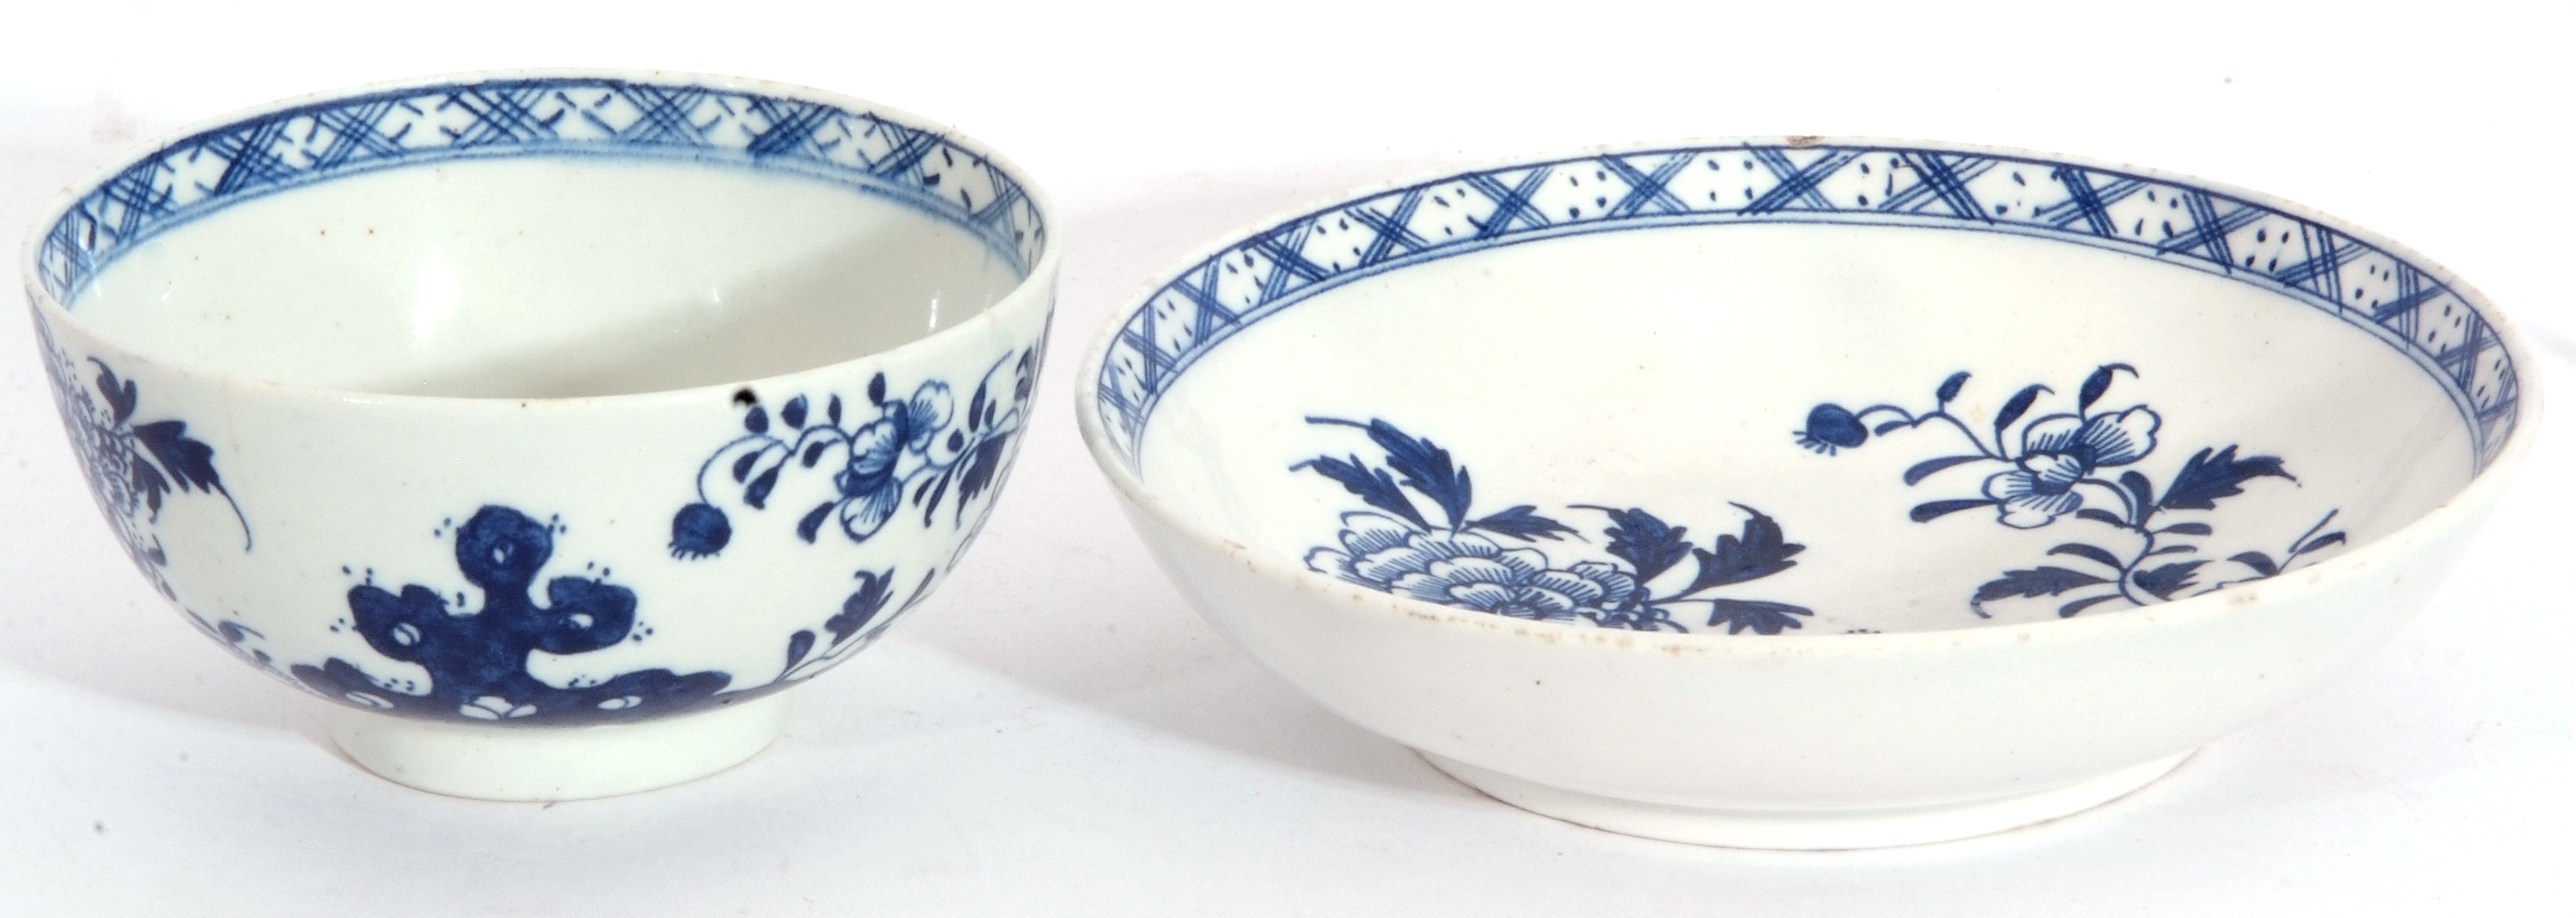 Large Lowestoft porcelain tea bowl and saucer decorated in underglaze blue with flowers and rock - Image 2 of 9